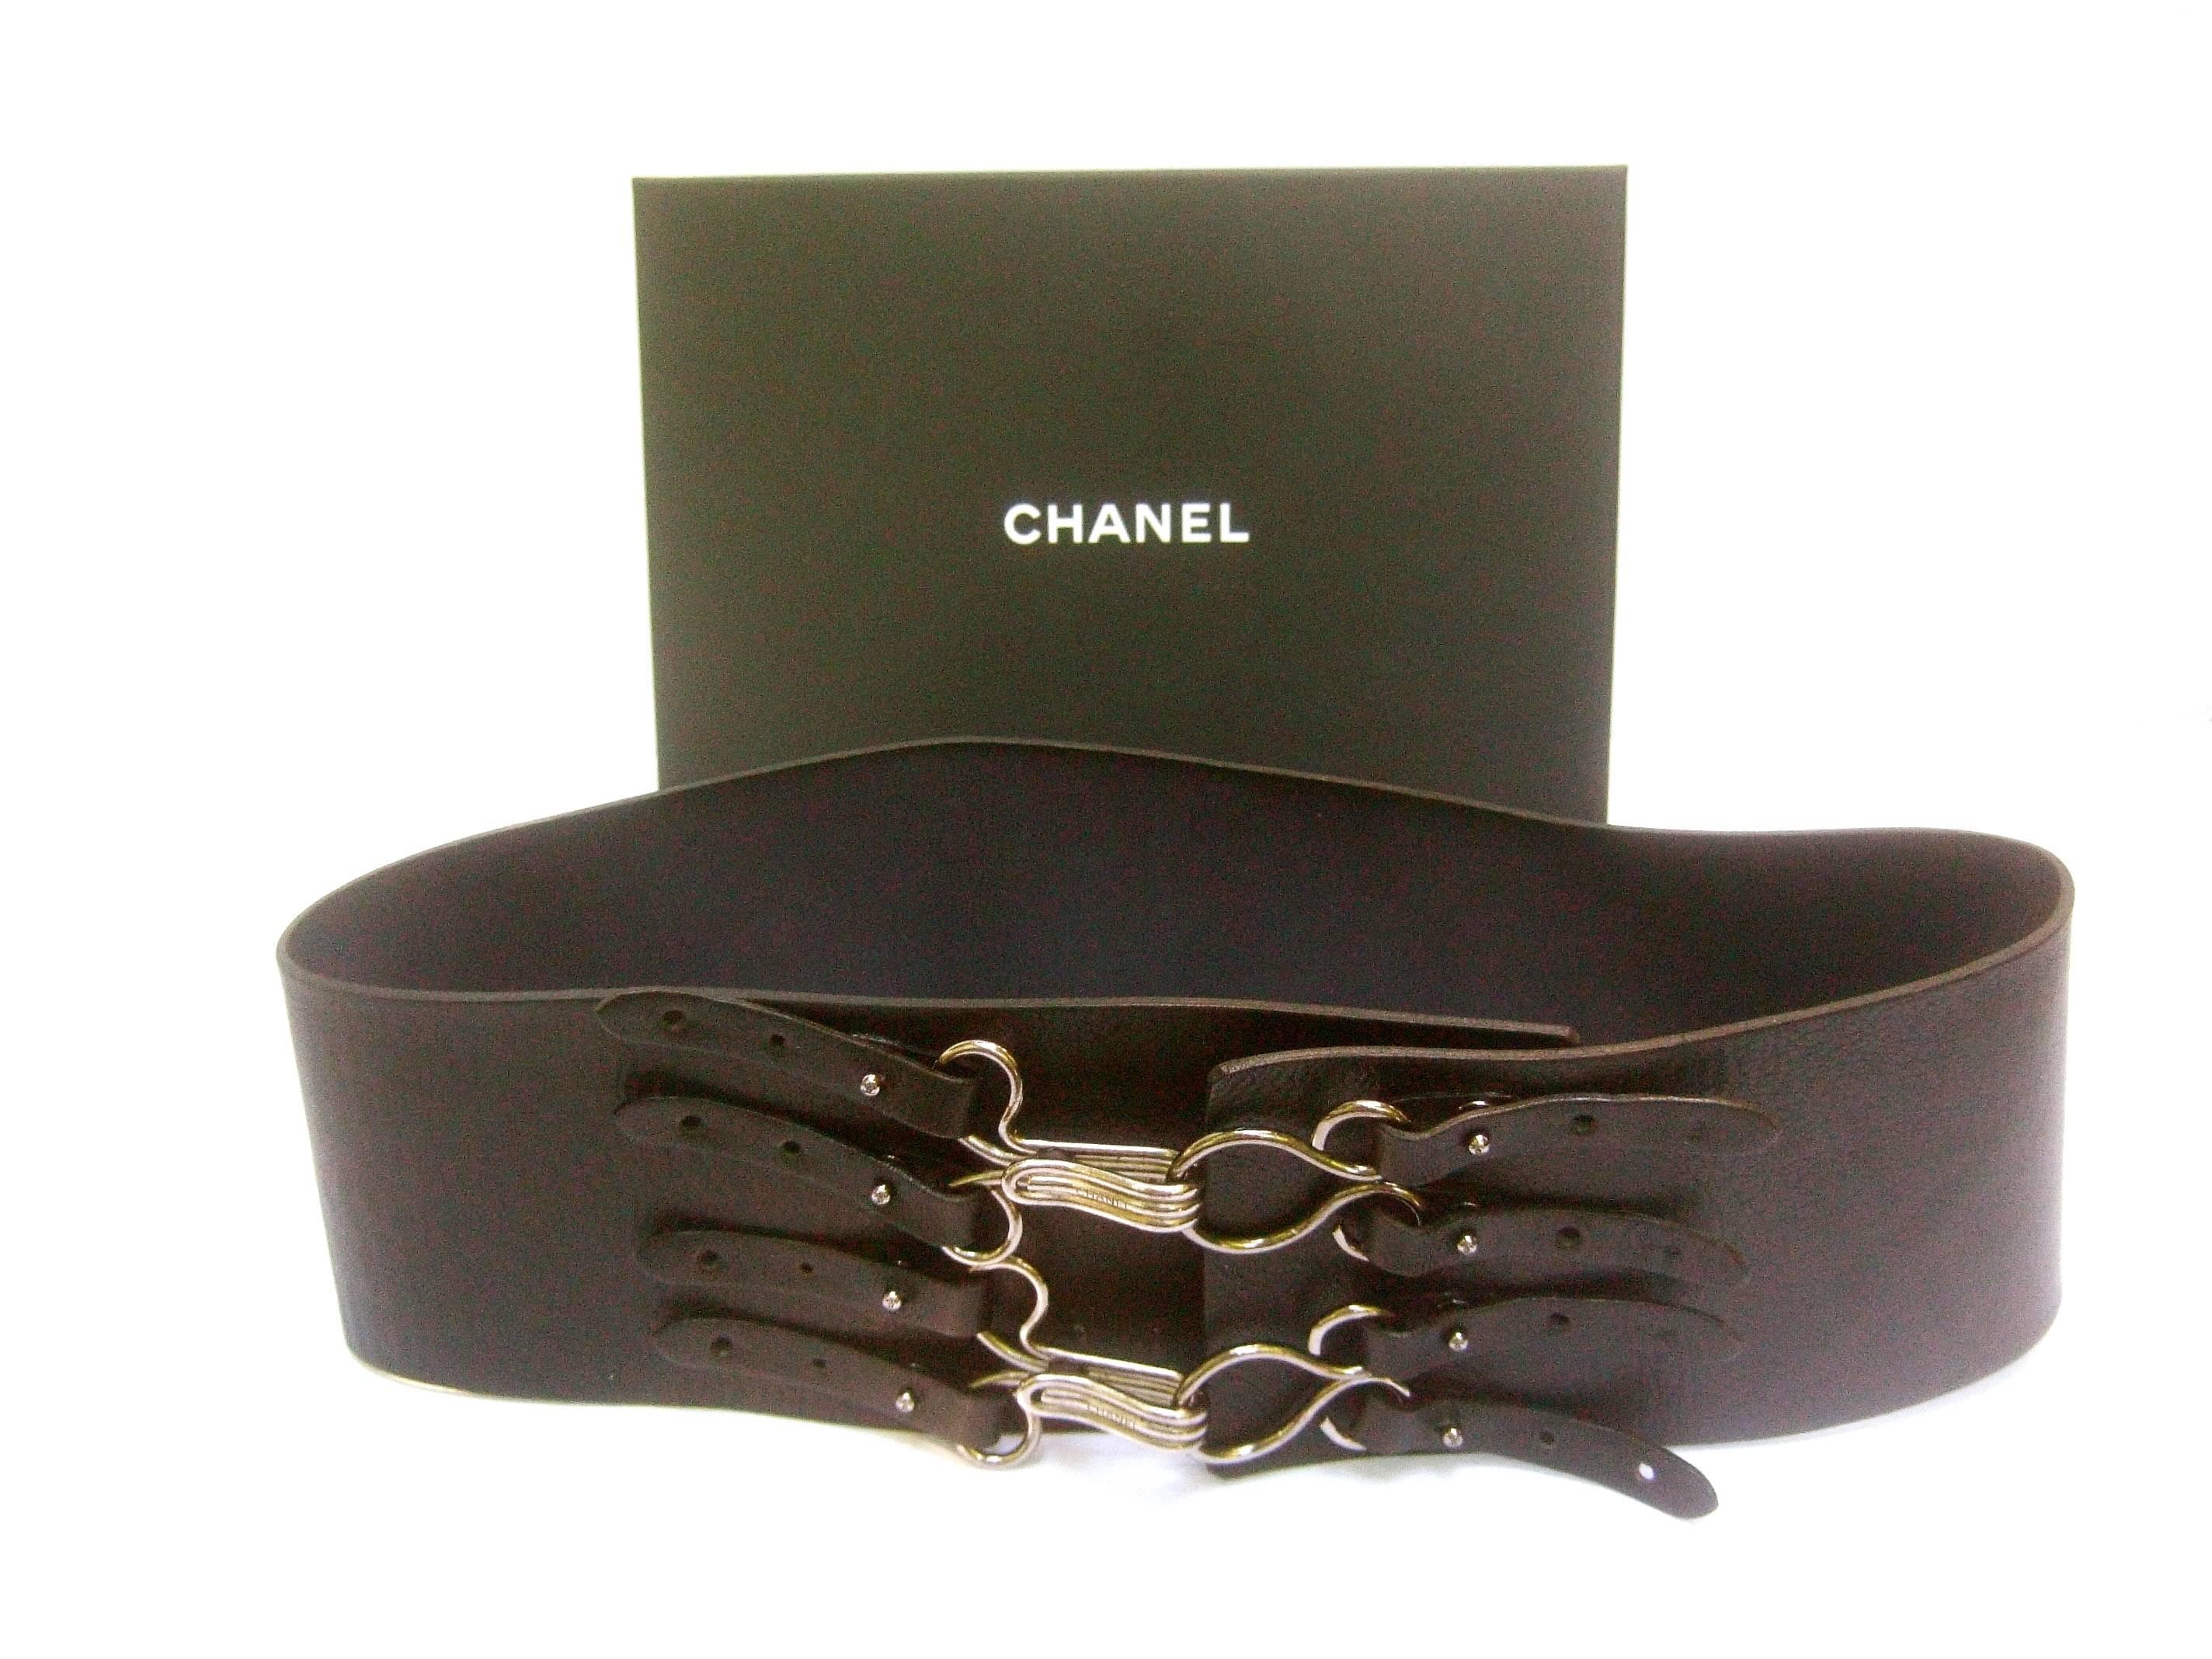 Chanel bold wide black leather belt in Chanel box 
The stylish high fashion belt is designed with a pair
of large silver metal clamps. Each clamp is inscribed 
Chanel 

The unique design allows the silver metal magnetic 
clamps to adjust over three